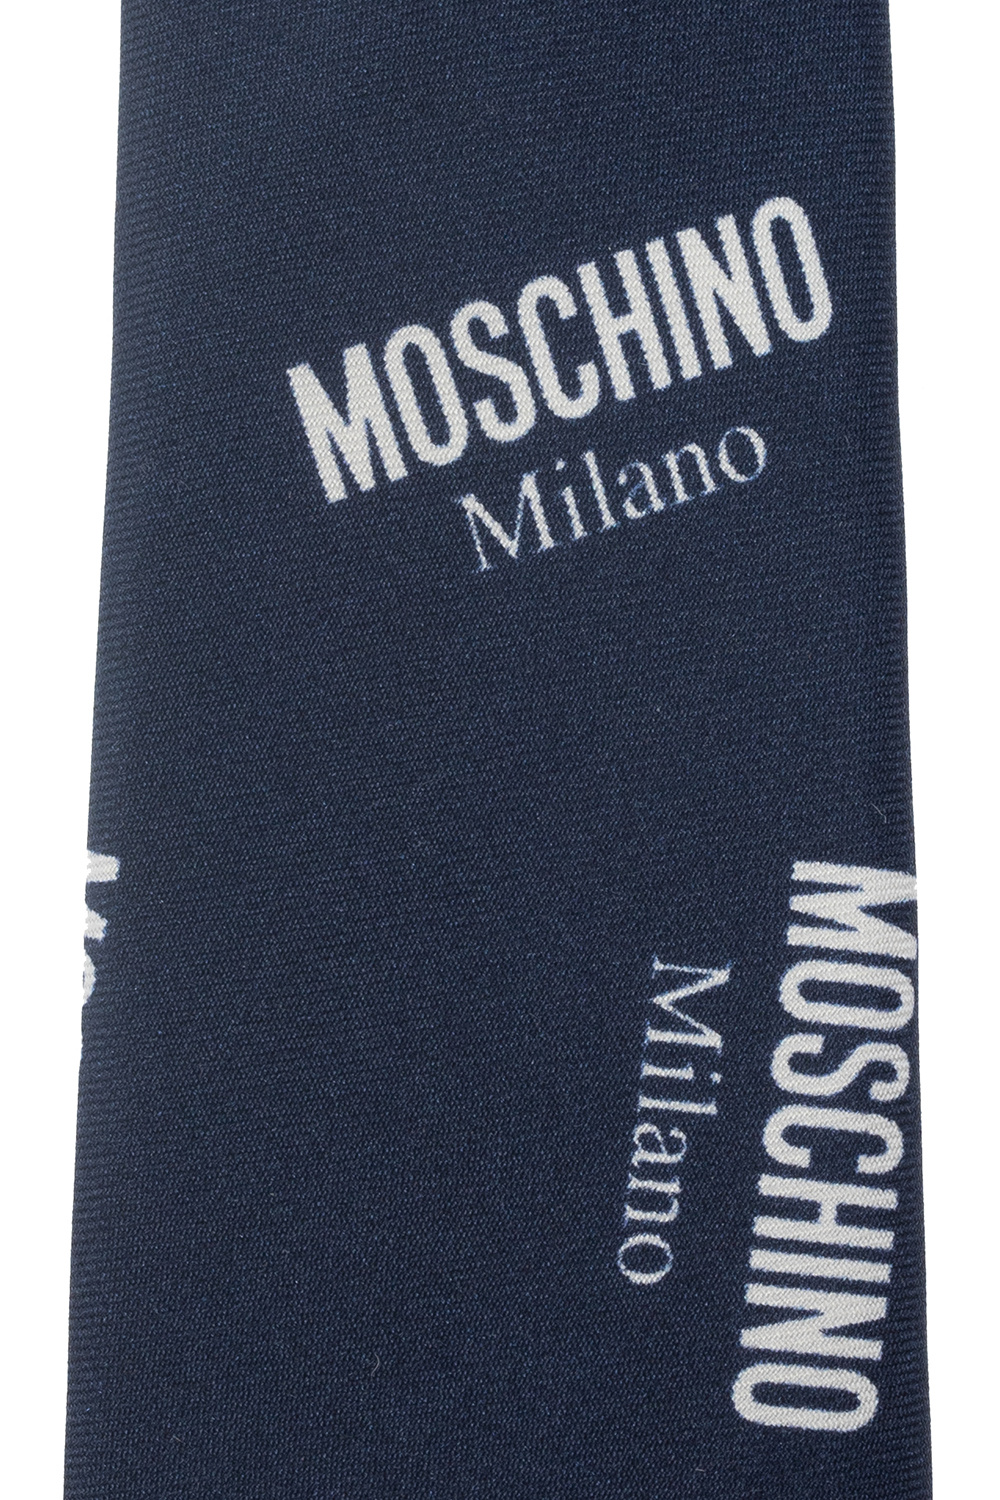 Moschino TIES / BOWS